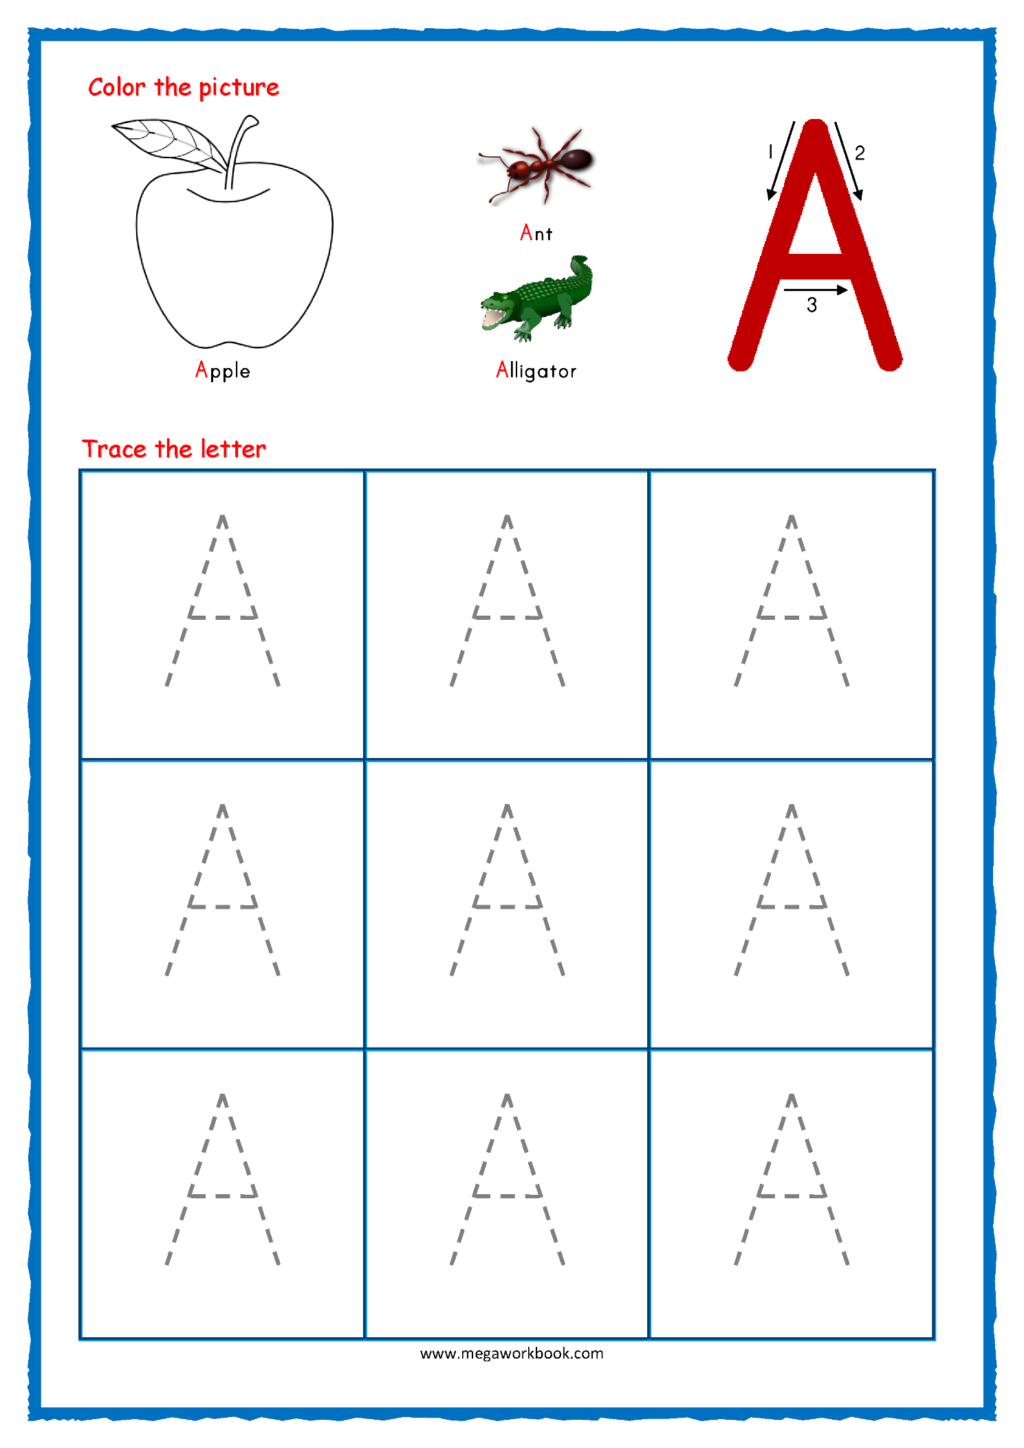 Worksheet ~ Capital Letter Tracing With Crayons 01 Alphabet intended for Alphabet Tracing Worksheets For Preschool